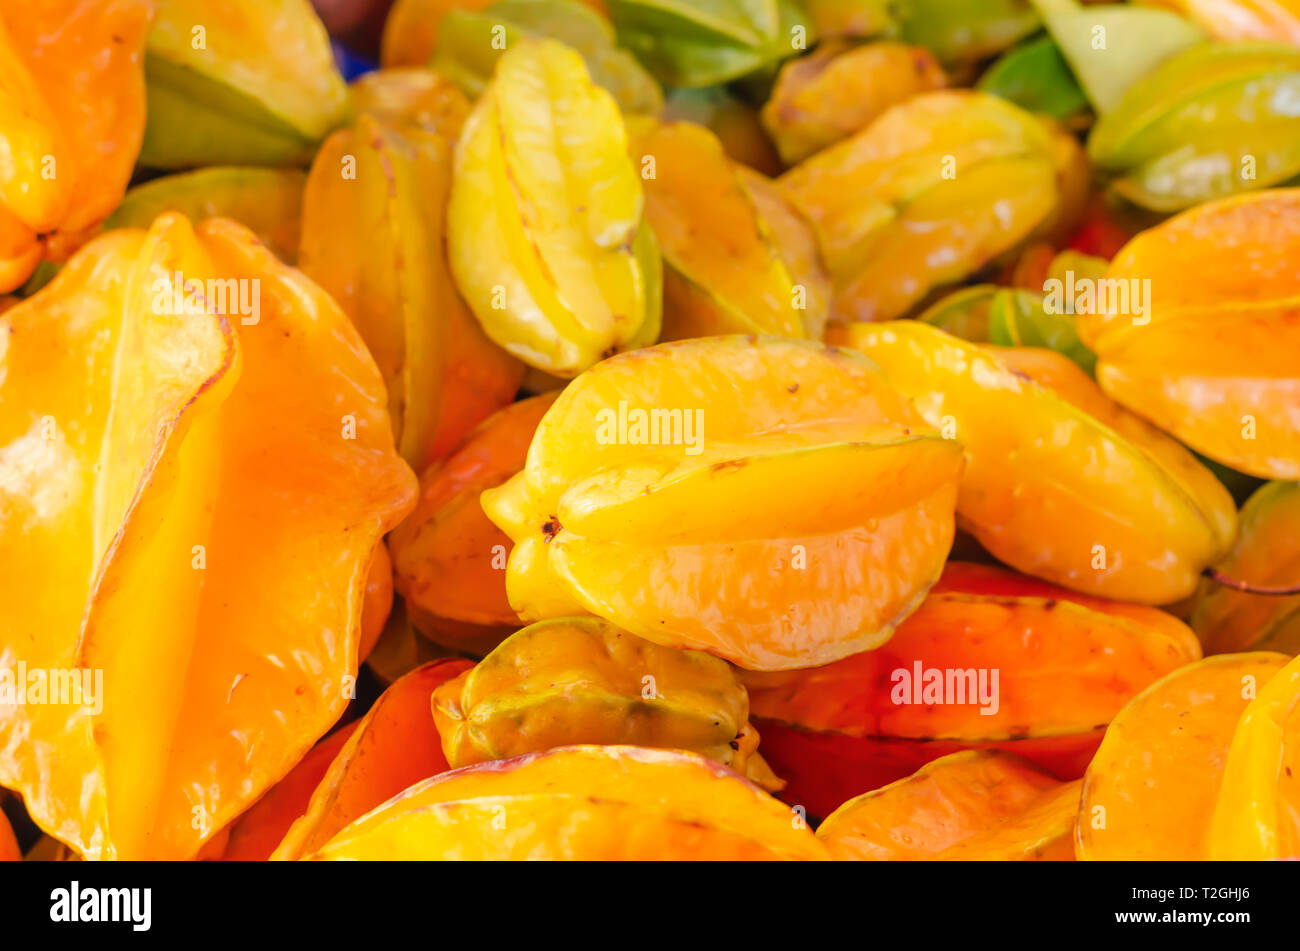 carambola fruit or fruit star for sale in market stacked with yellow orange and green tones Stock Photo